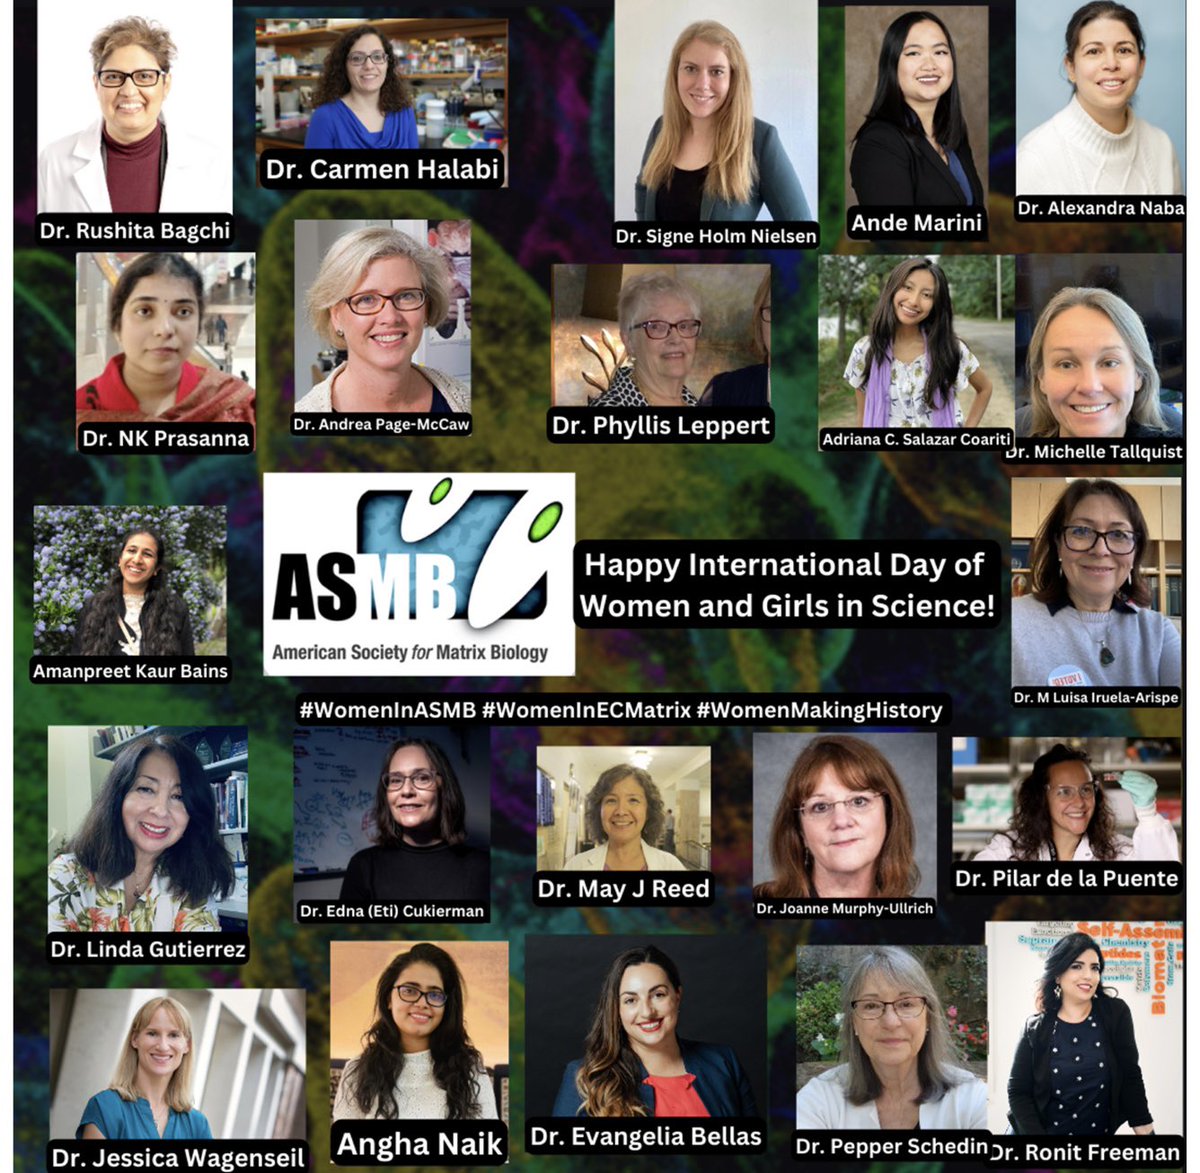 ‼️🎉Are you a #WomenInASMB or someone who promotes #WomenInSTEM? Then consider submitting to our ASMB highlight survey for #Internationalwomenandgirlsinscienceday (found in our e-blast)! We would love to highlight the amazing women! See our collage from last year!